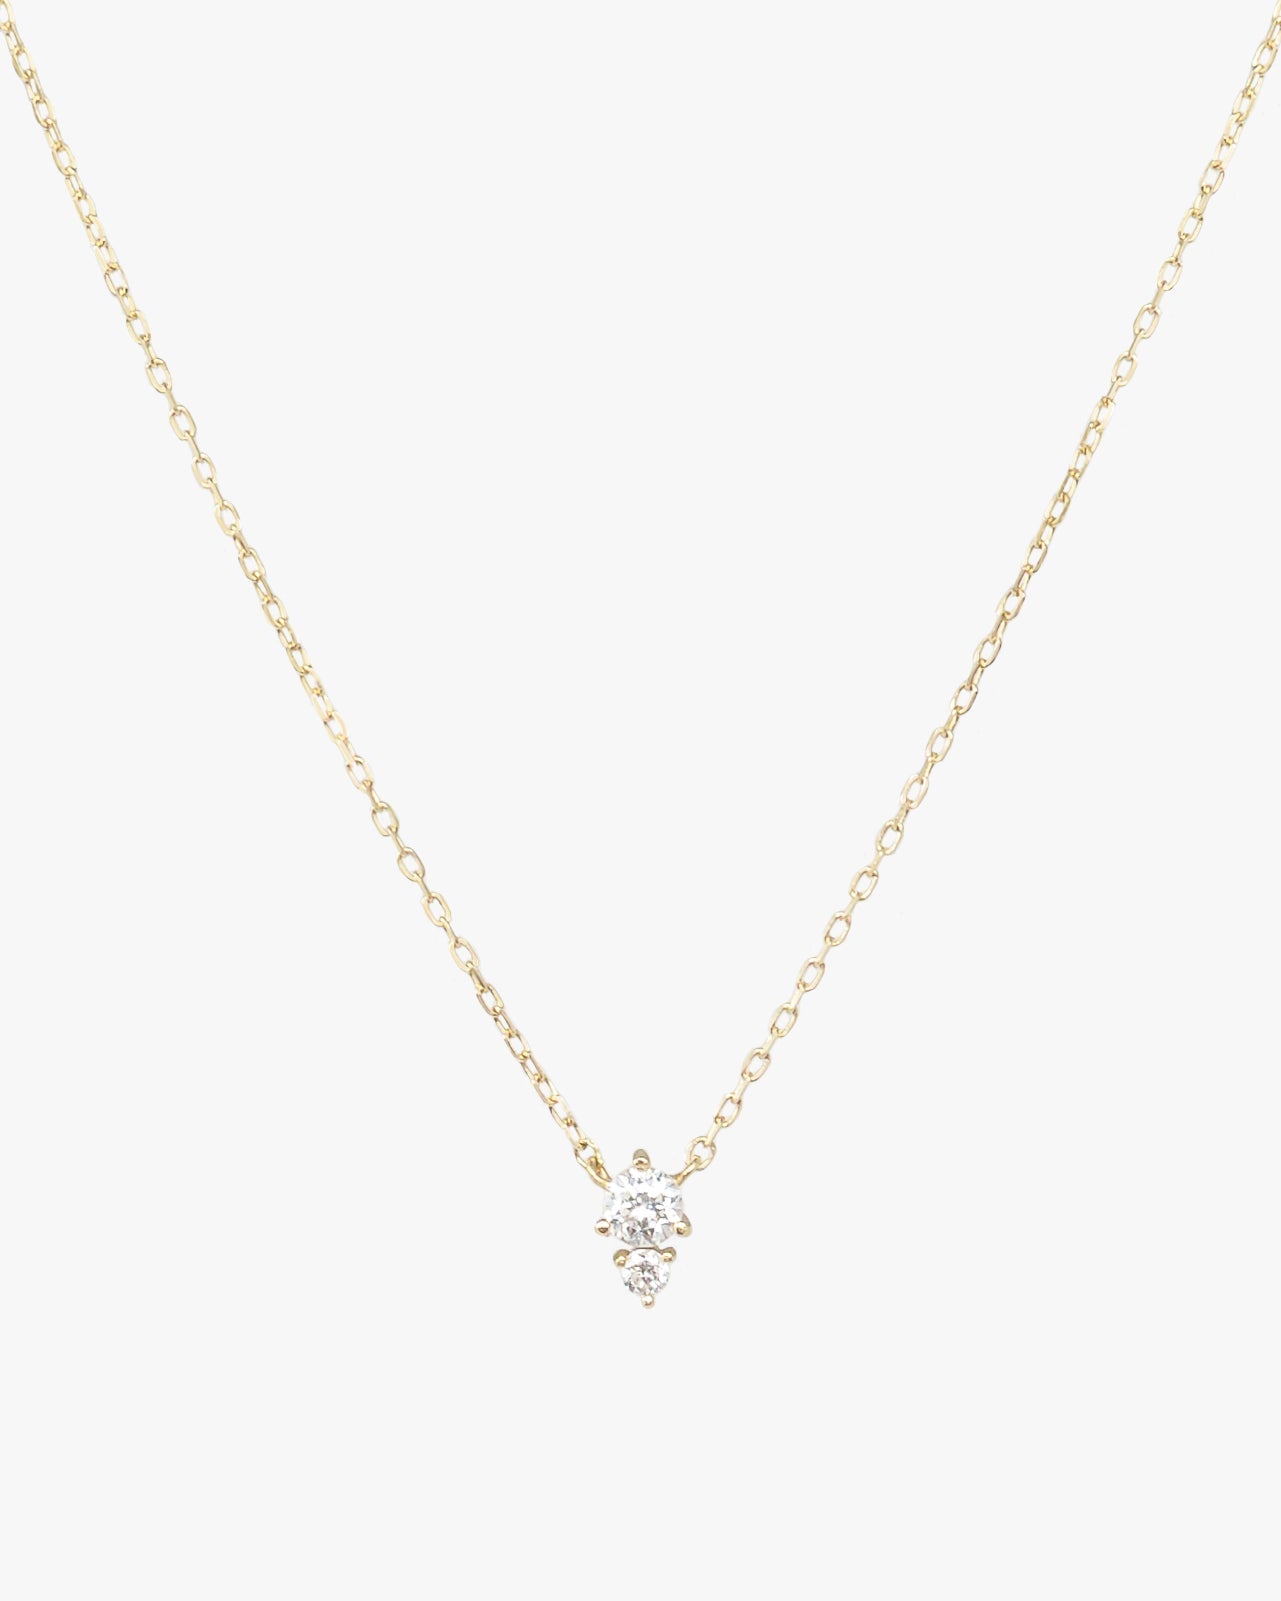 BRENTWOOD DIAMOND DUO NECKLACE - Shop Cupcakes and Cashmere